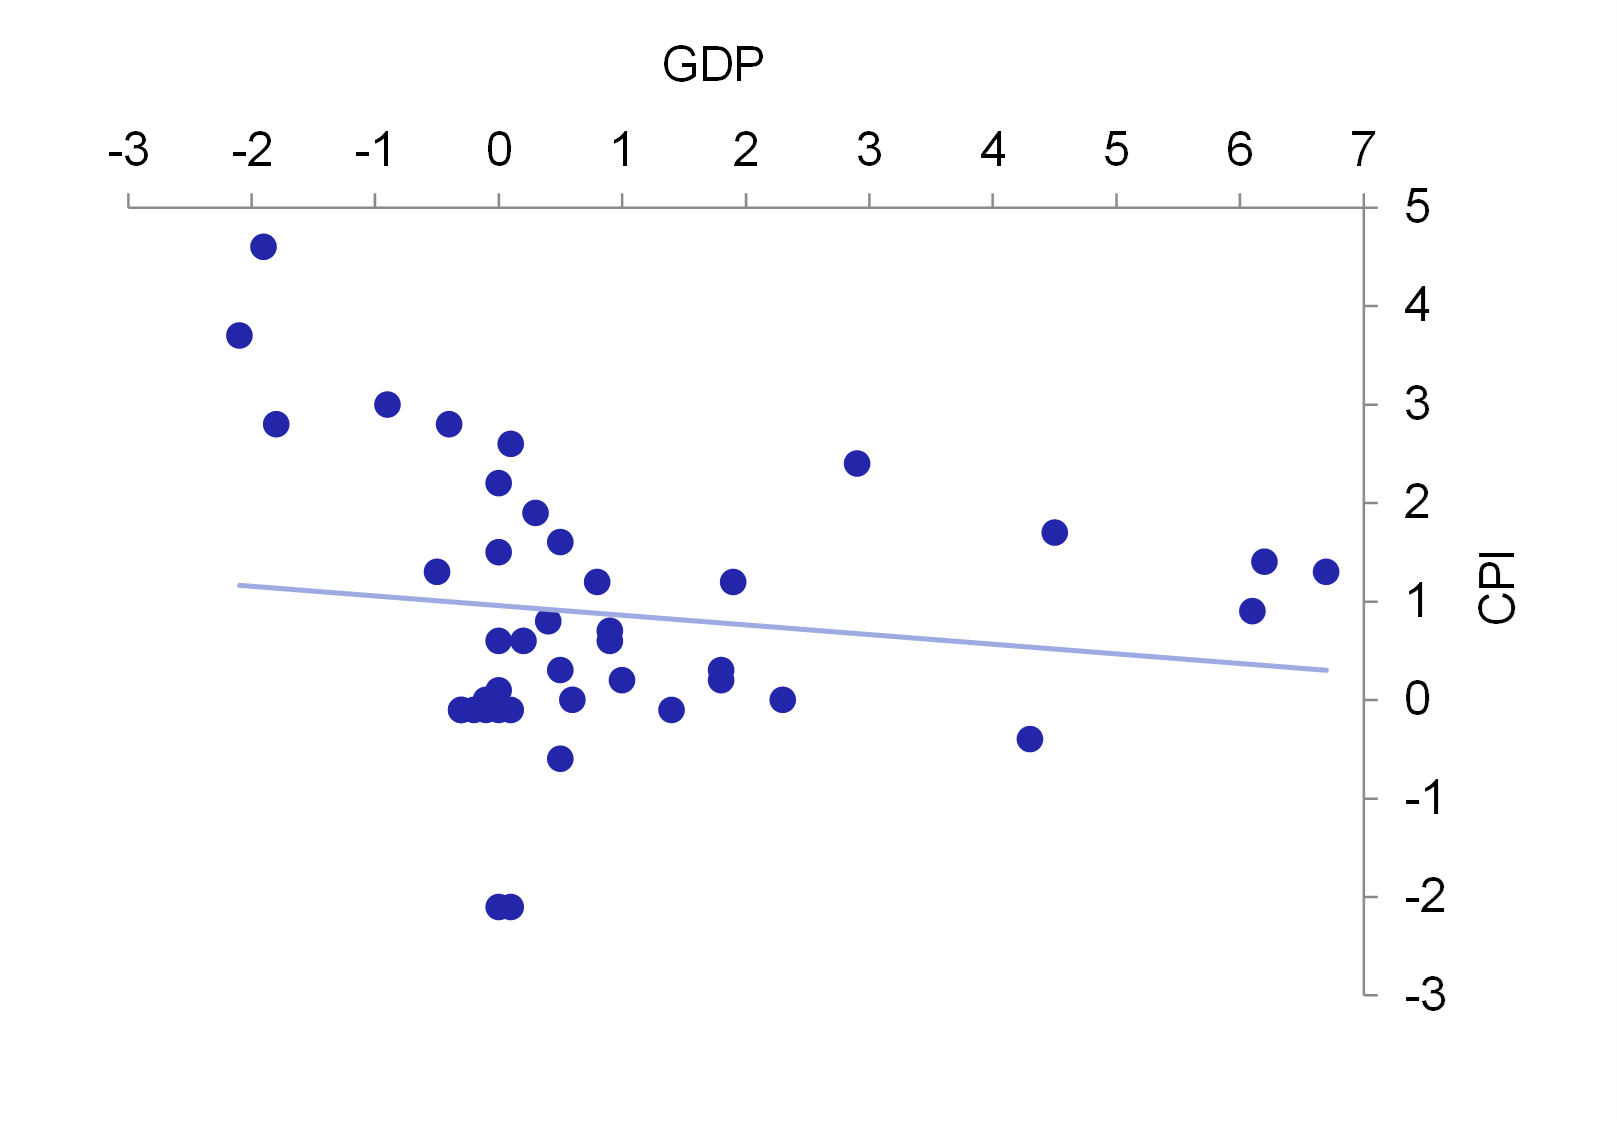 Chart 2 – Relationship between GDP and CPI deviations